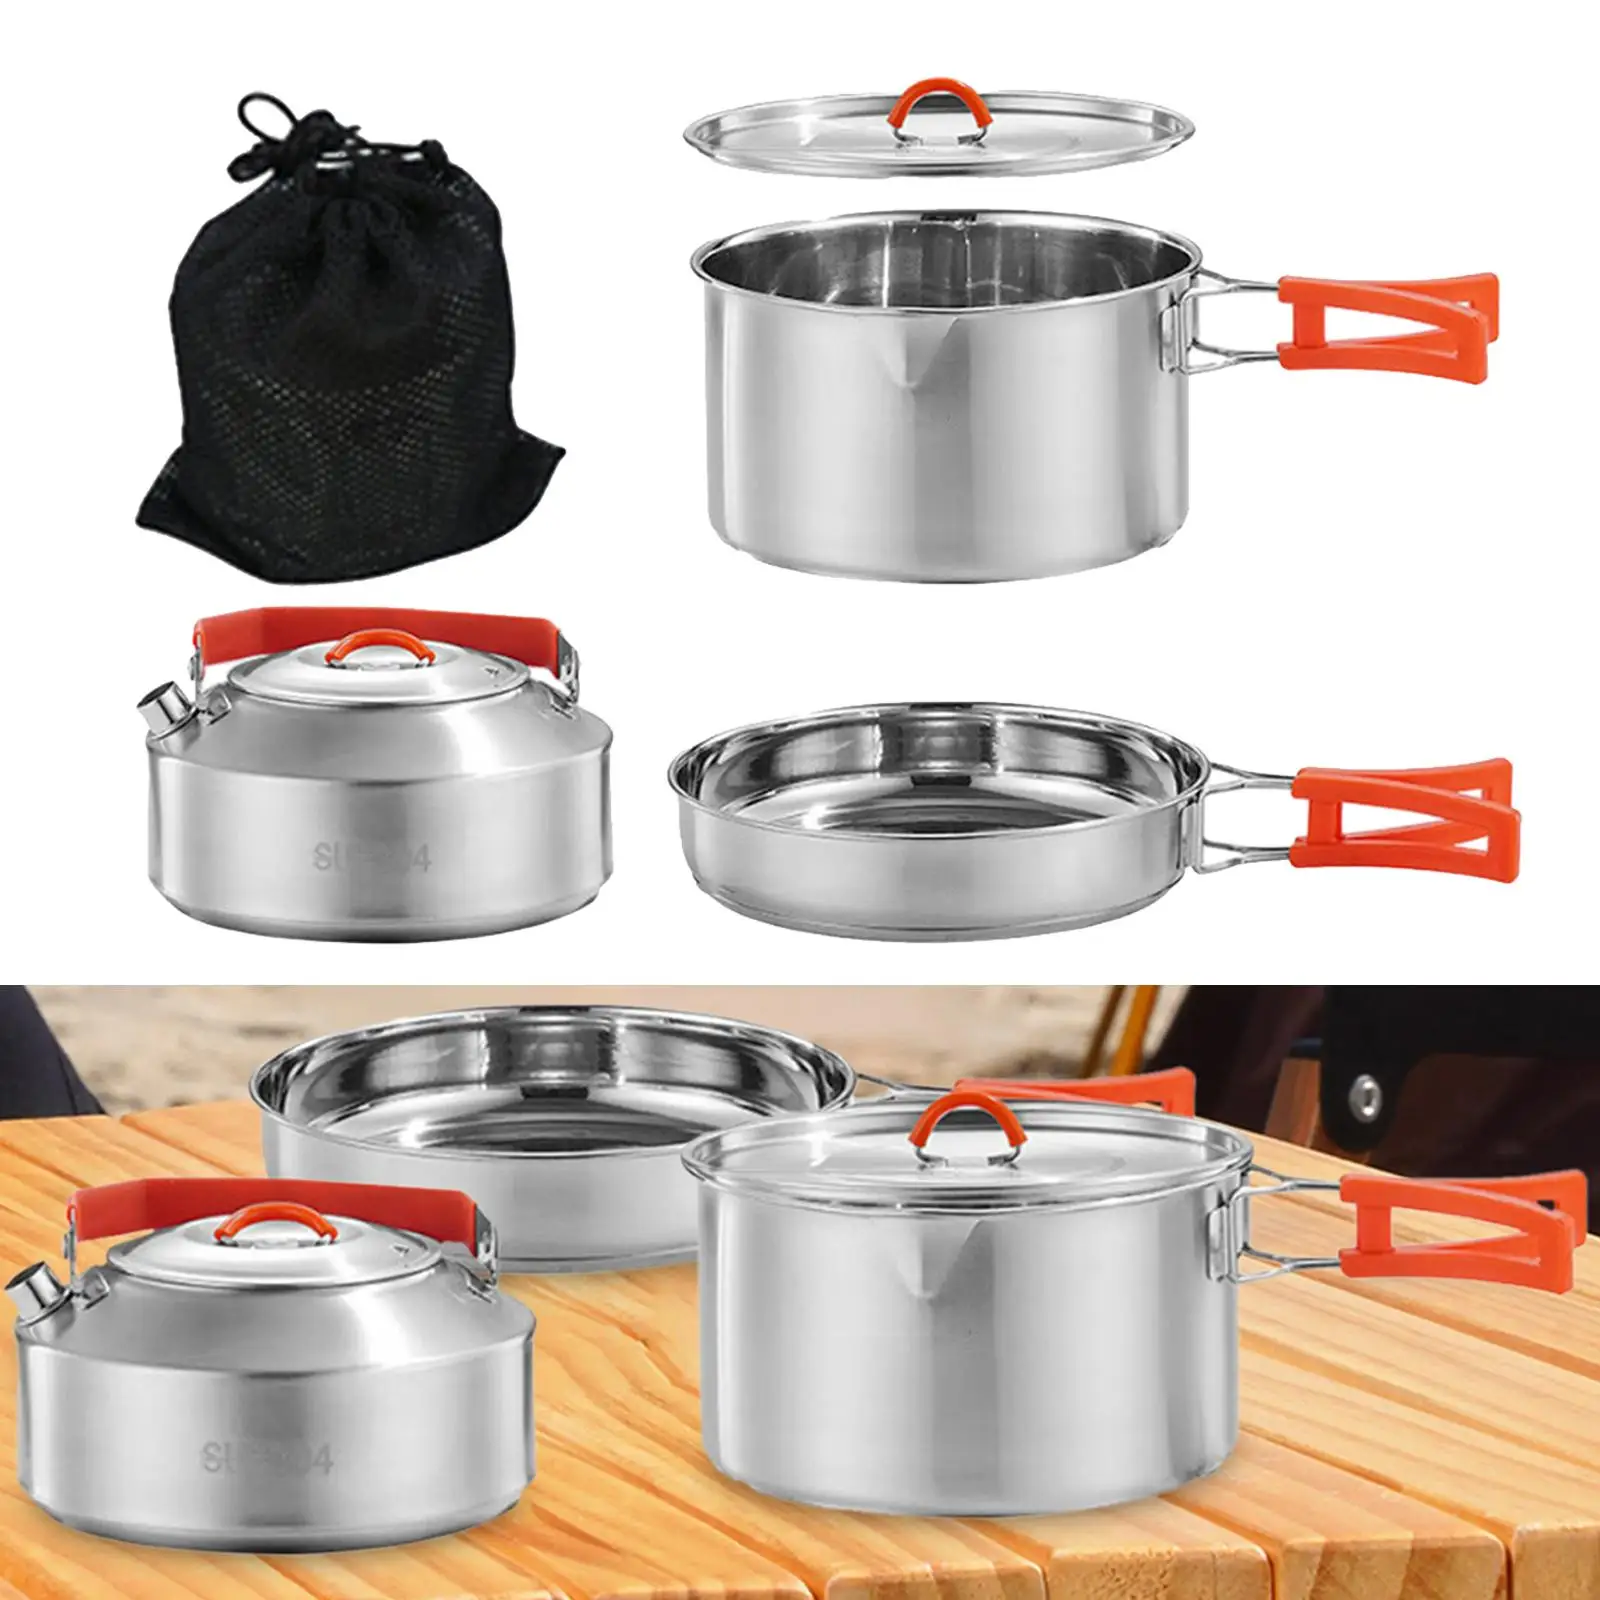 Camping Cookware Included Mesh Carry Bag 3Pcs/Set Durable Camping Pot and Pan for Backpacking Picnic Hiking Outdoor Accessories